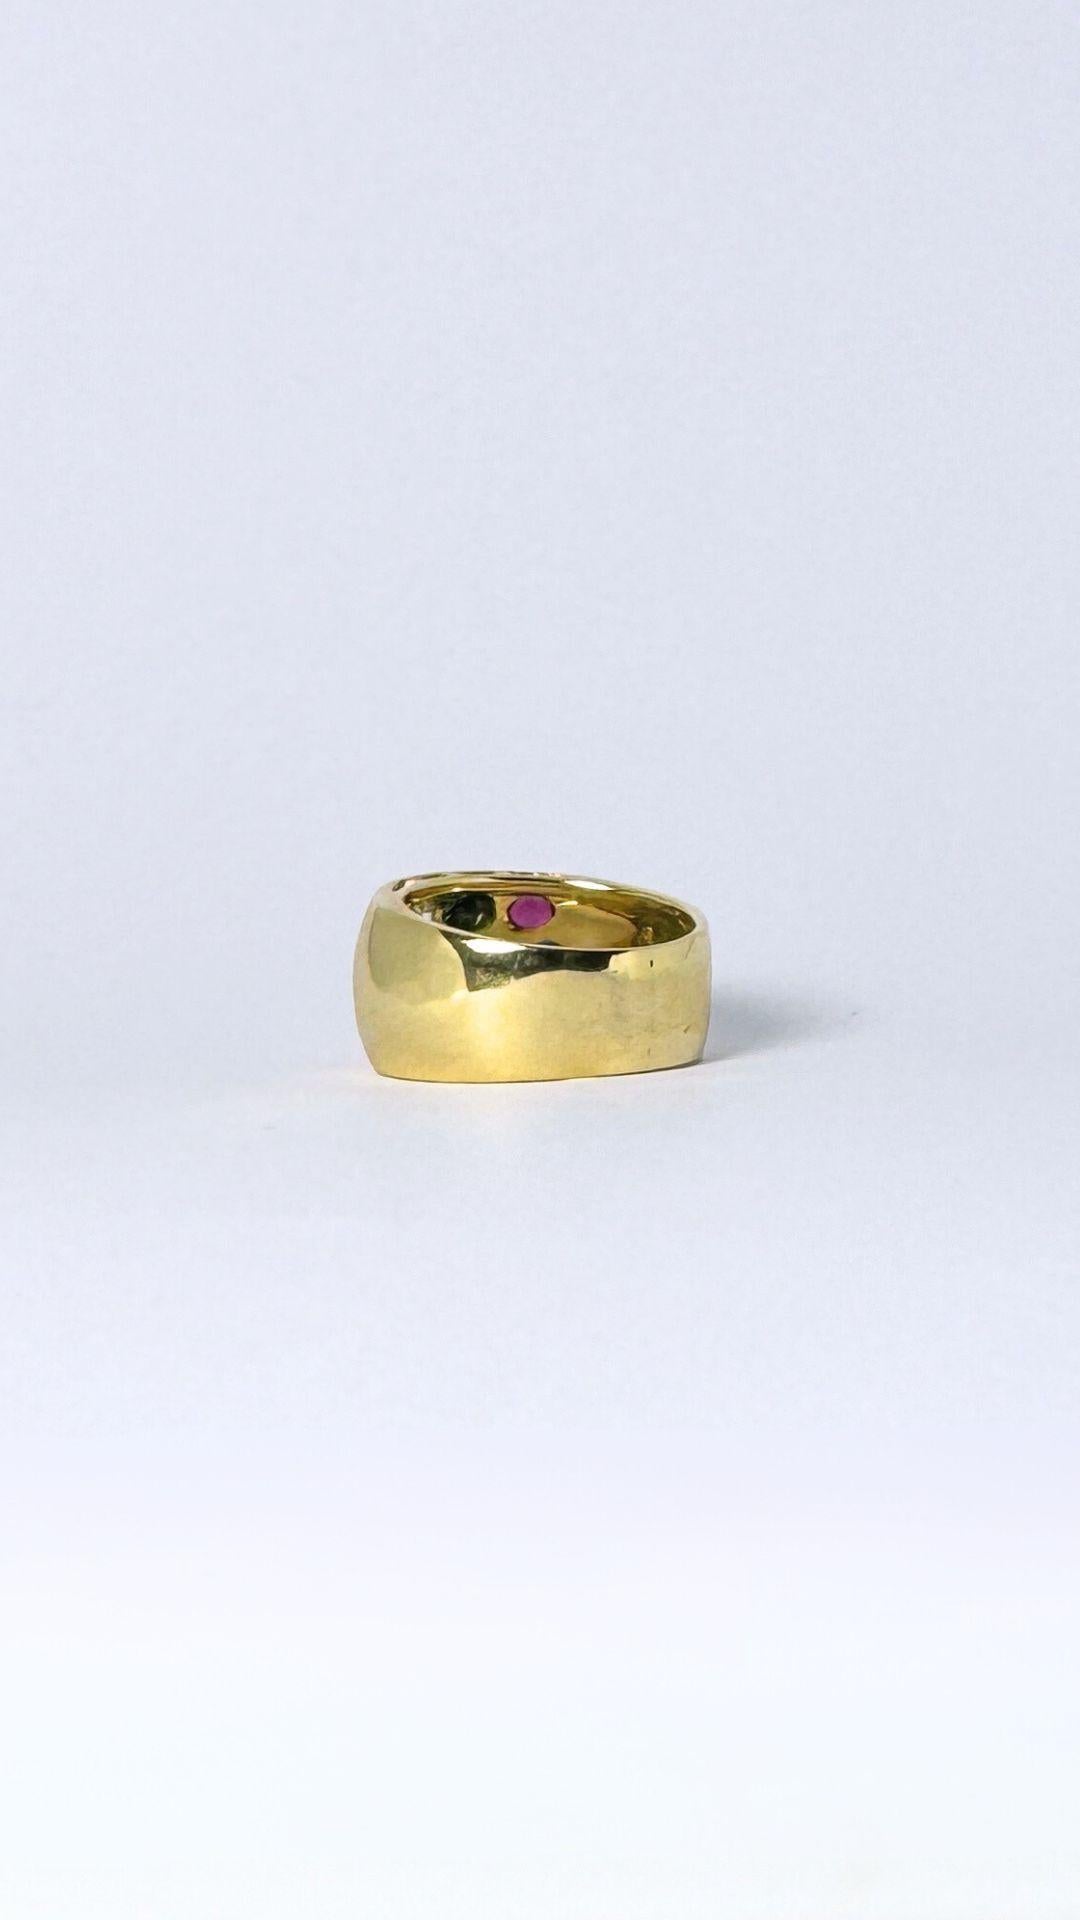 Brilliant Cut Cocktail ring made of 18 carat gold with diamonds, rubies, smaragd, sapphire For Sale